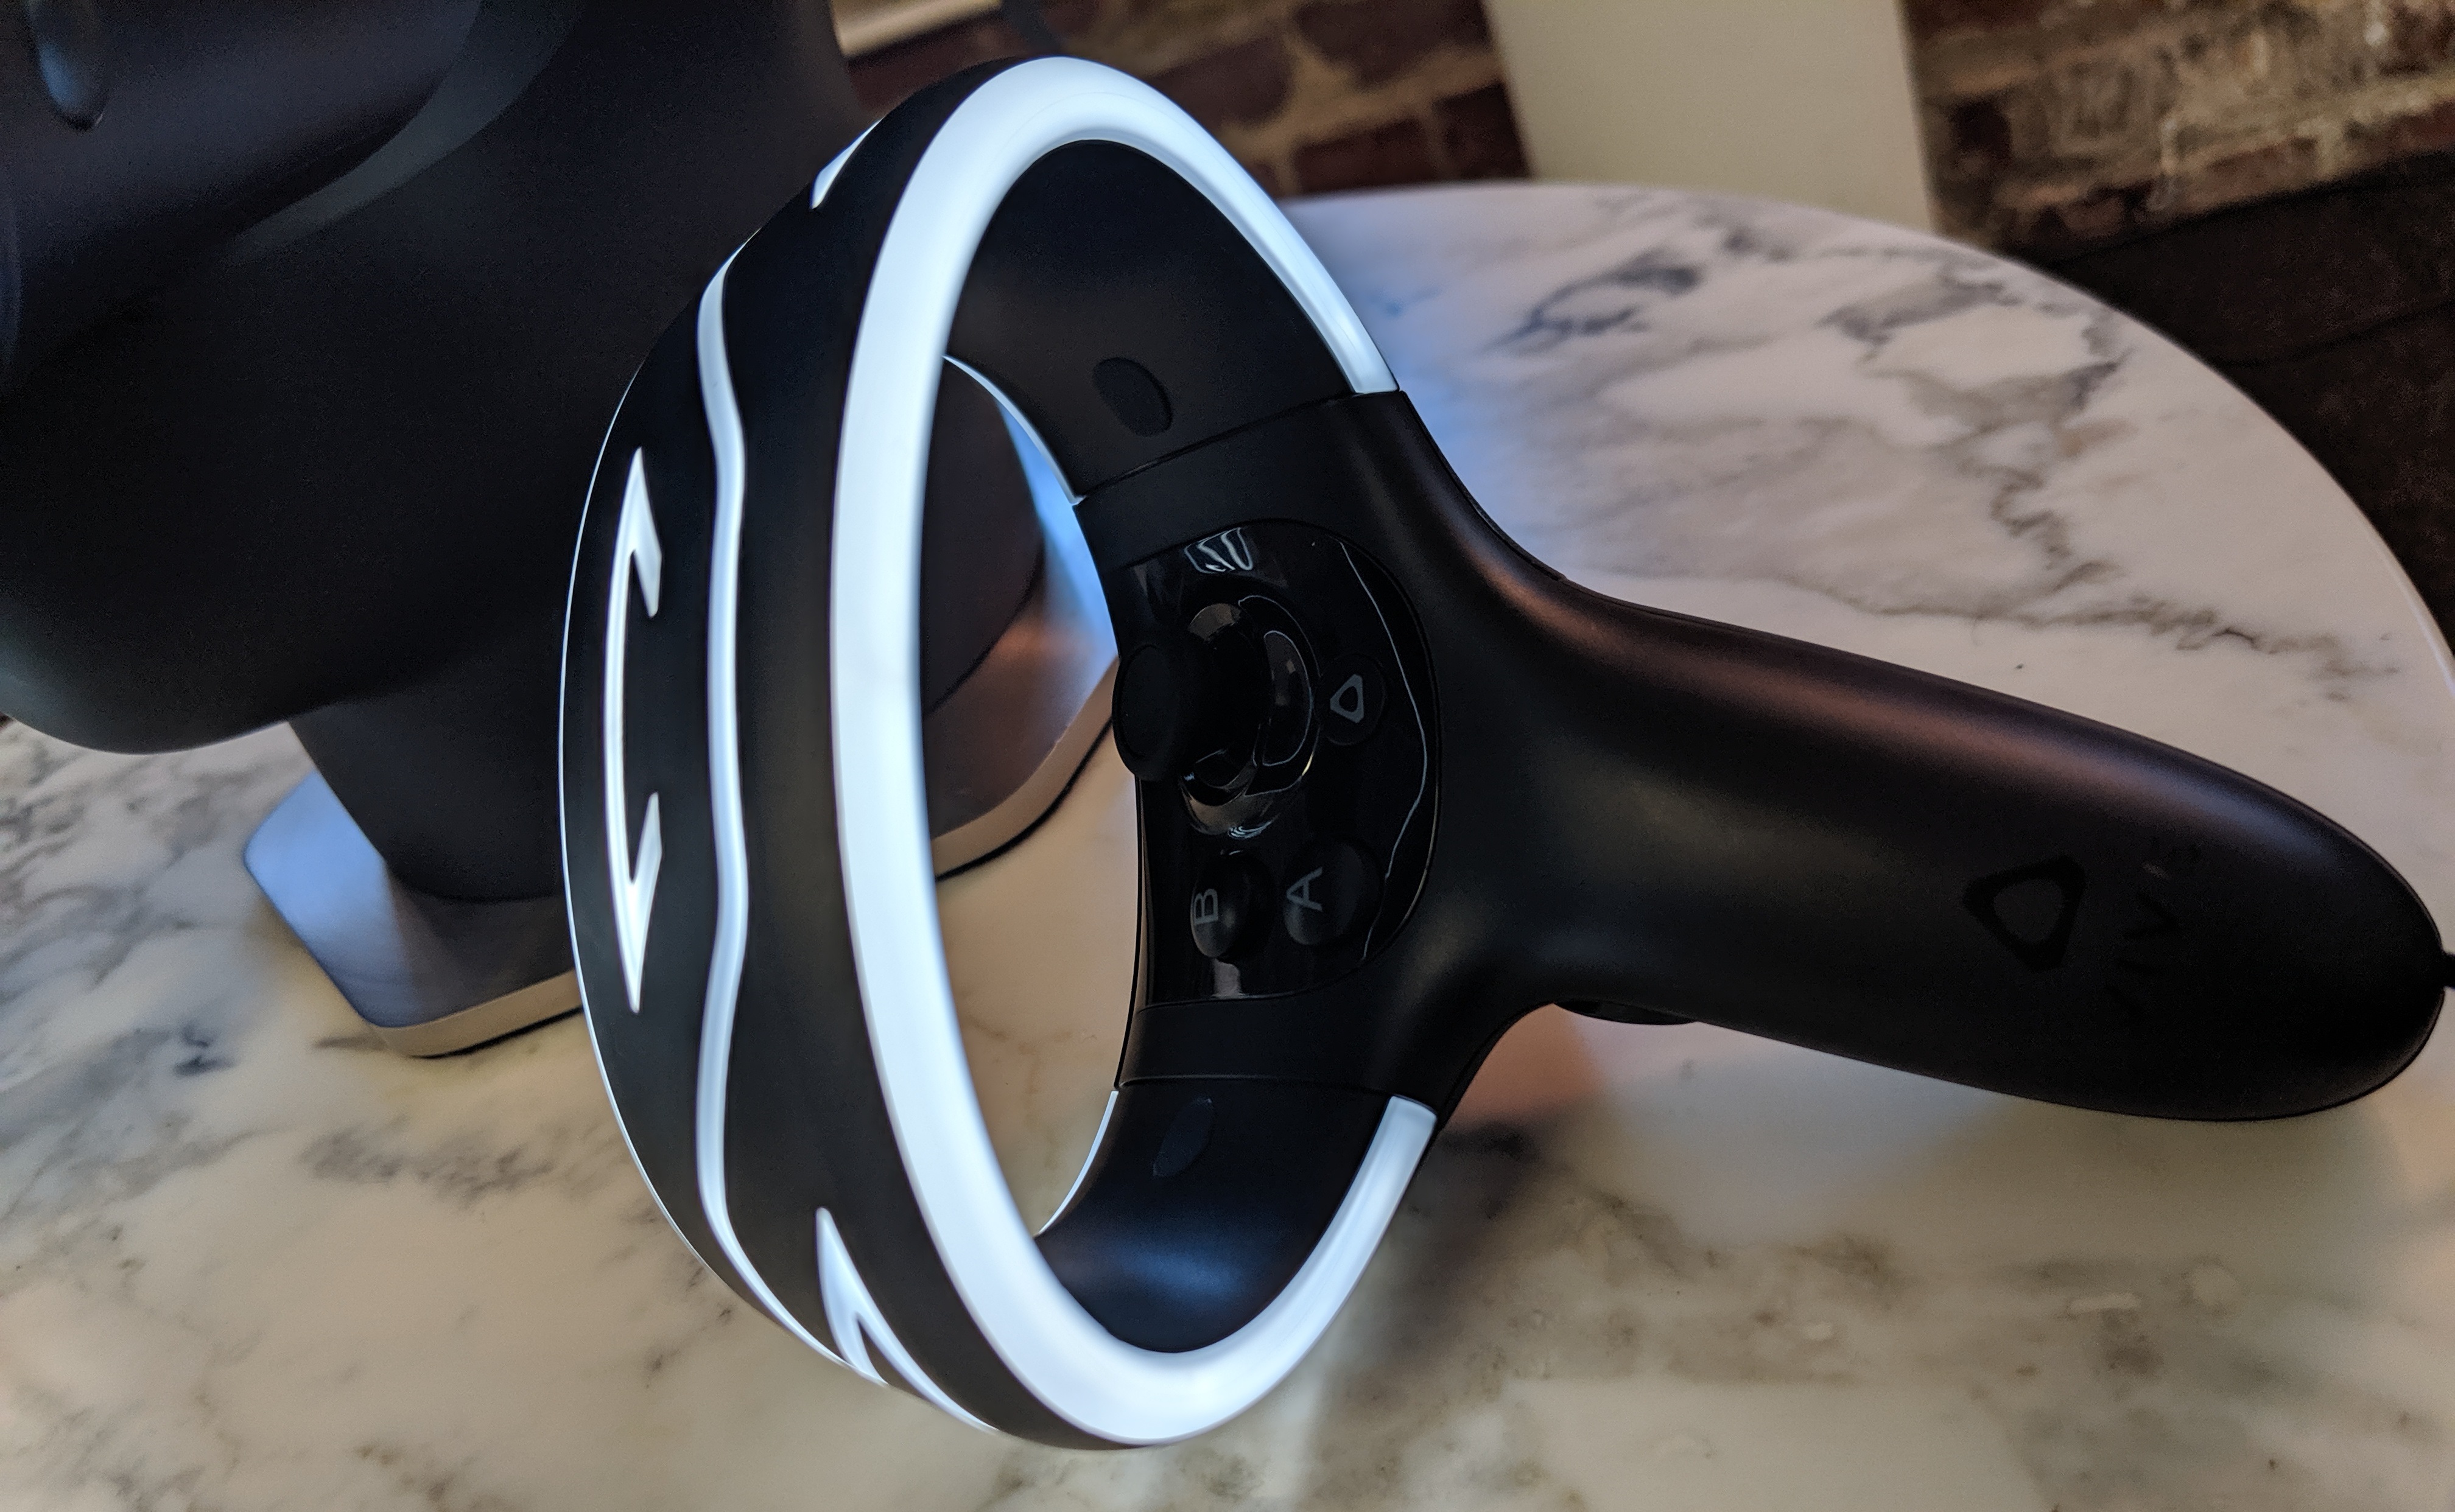 htc vive cosmos controller close up side view